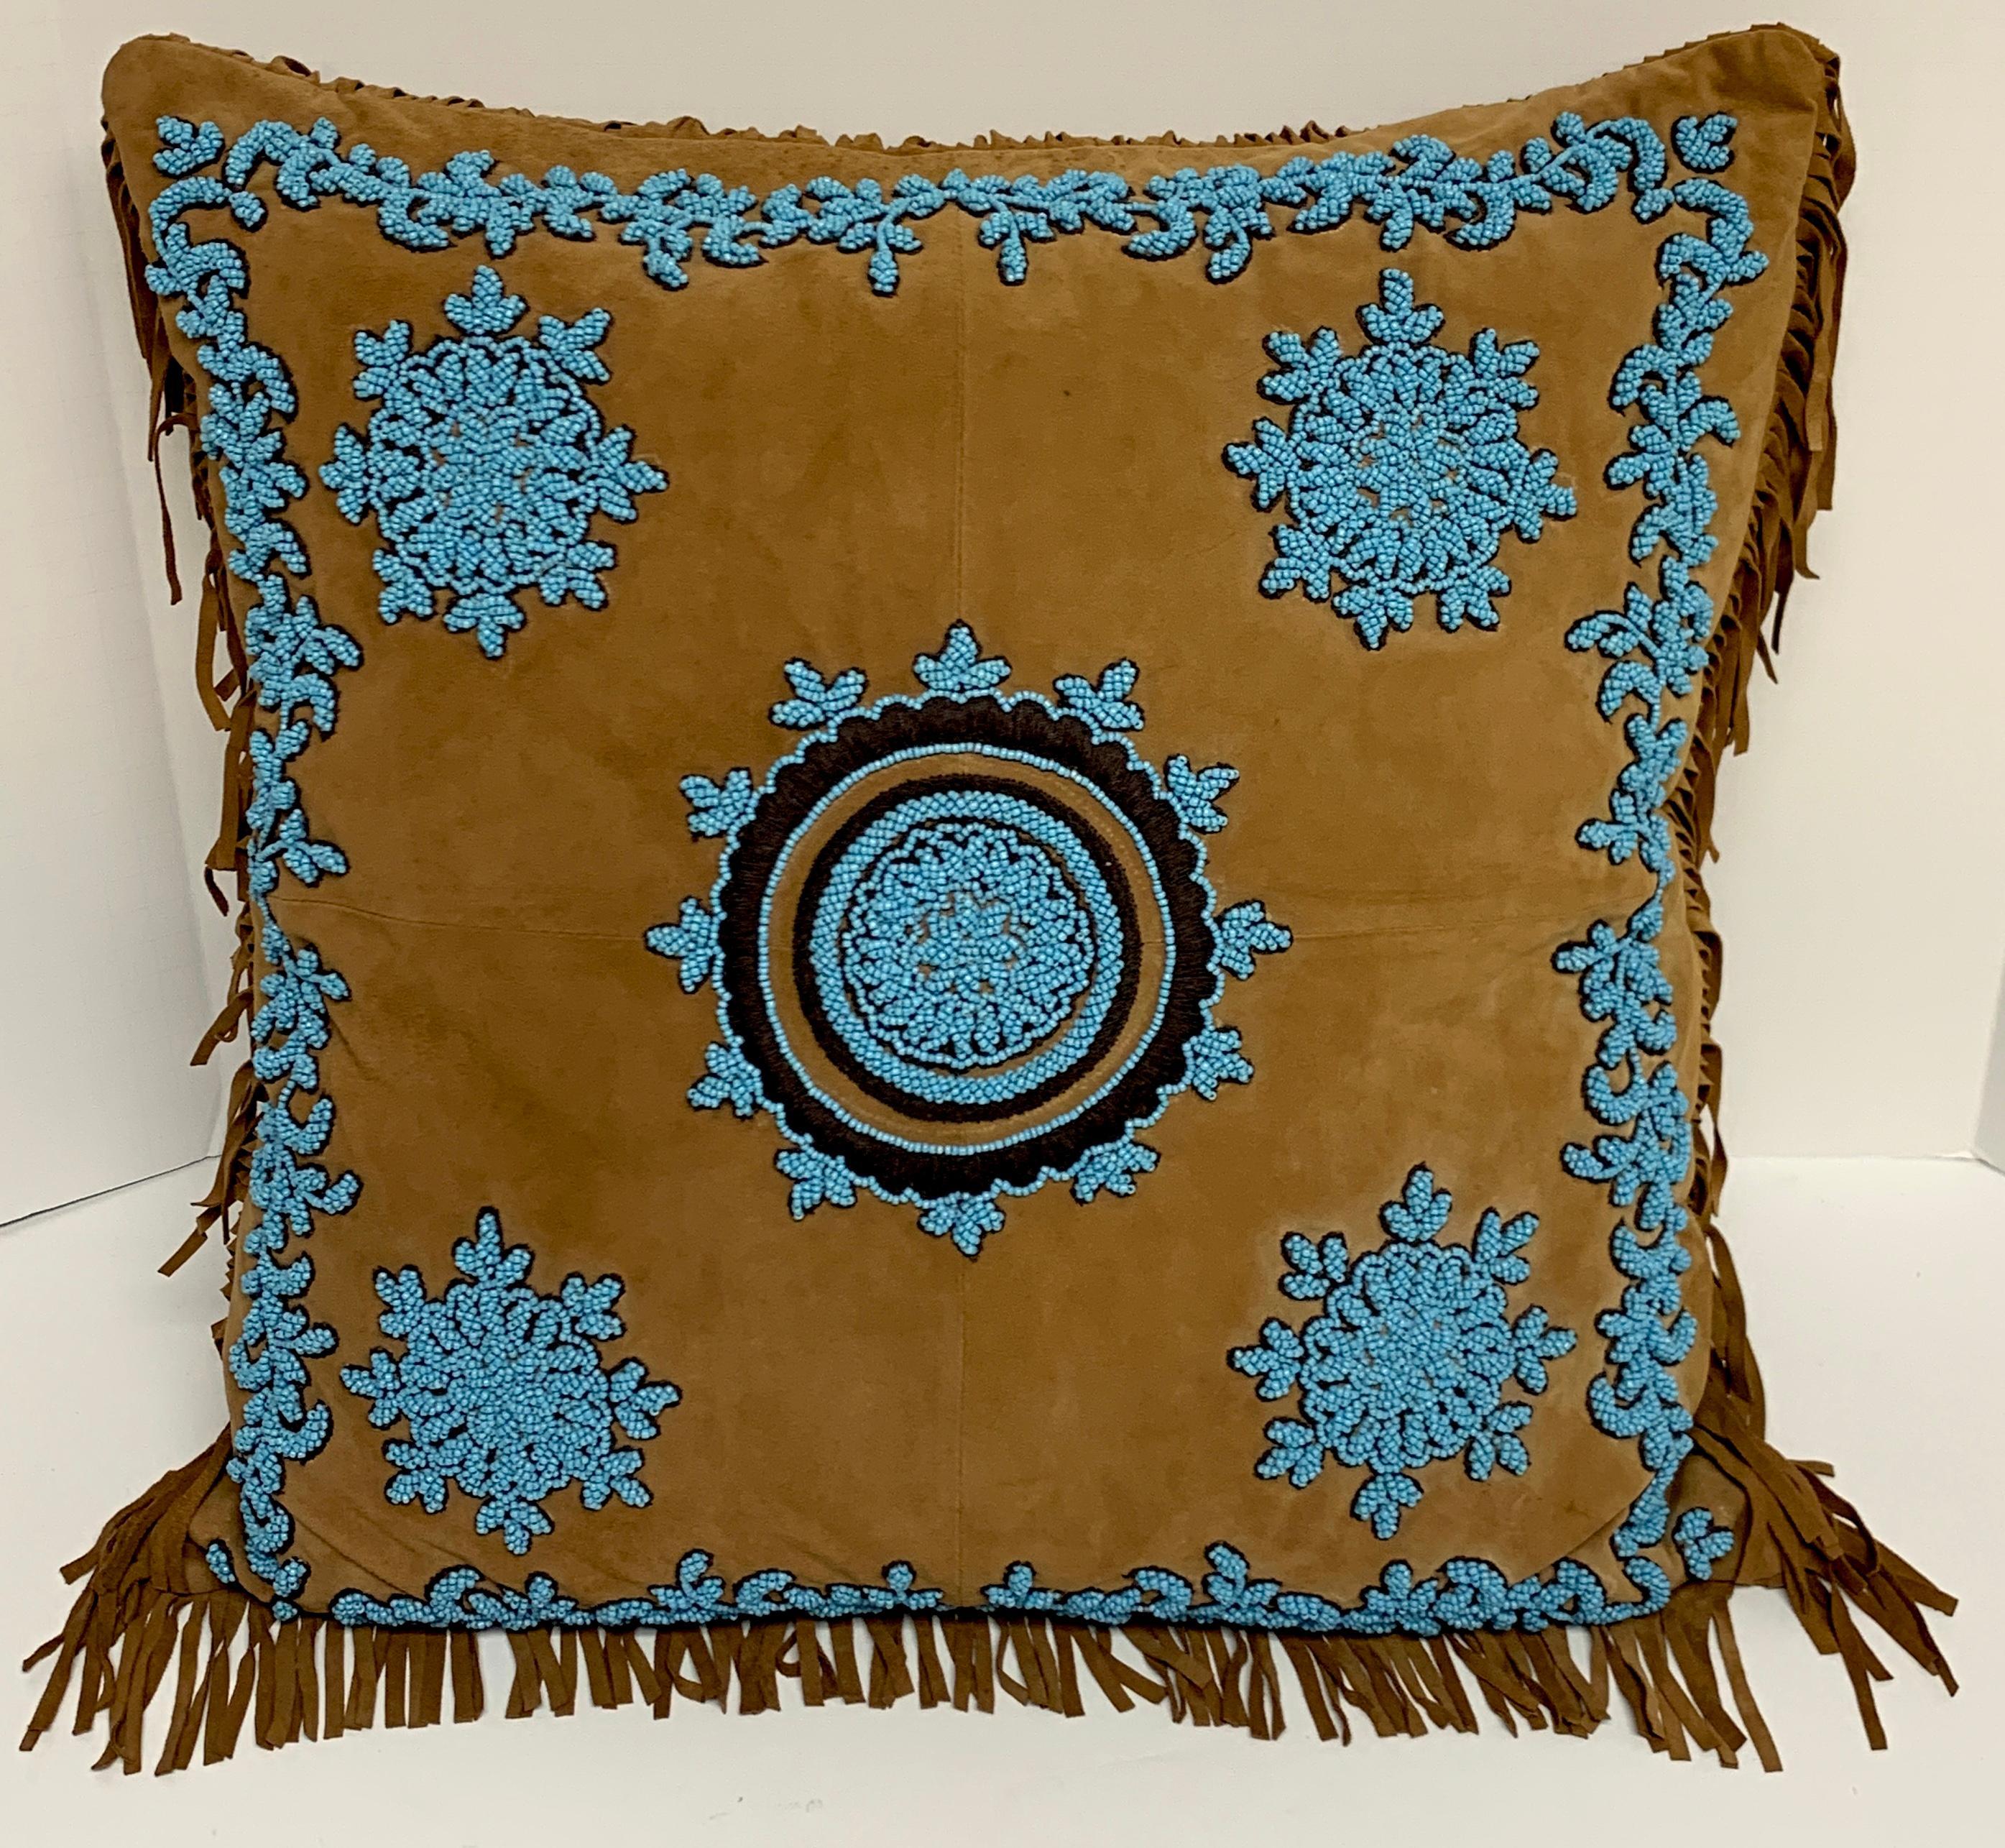 Native American style suede pillow with turquoise glass beadwork, luxurious deerskin/ suede, with intricate beadwork medallions and borders. Down filled with a 2.5 inch leather fringe.
The pillow measures: 18” H x 17” W with a 2.5 inch fringe